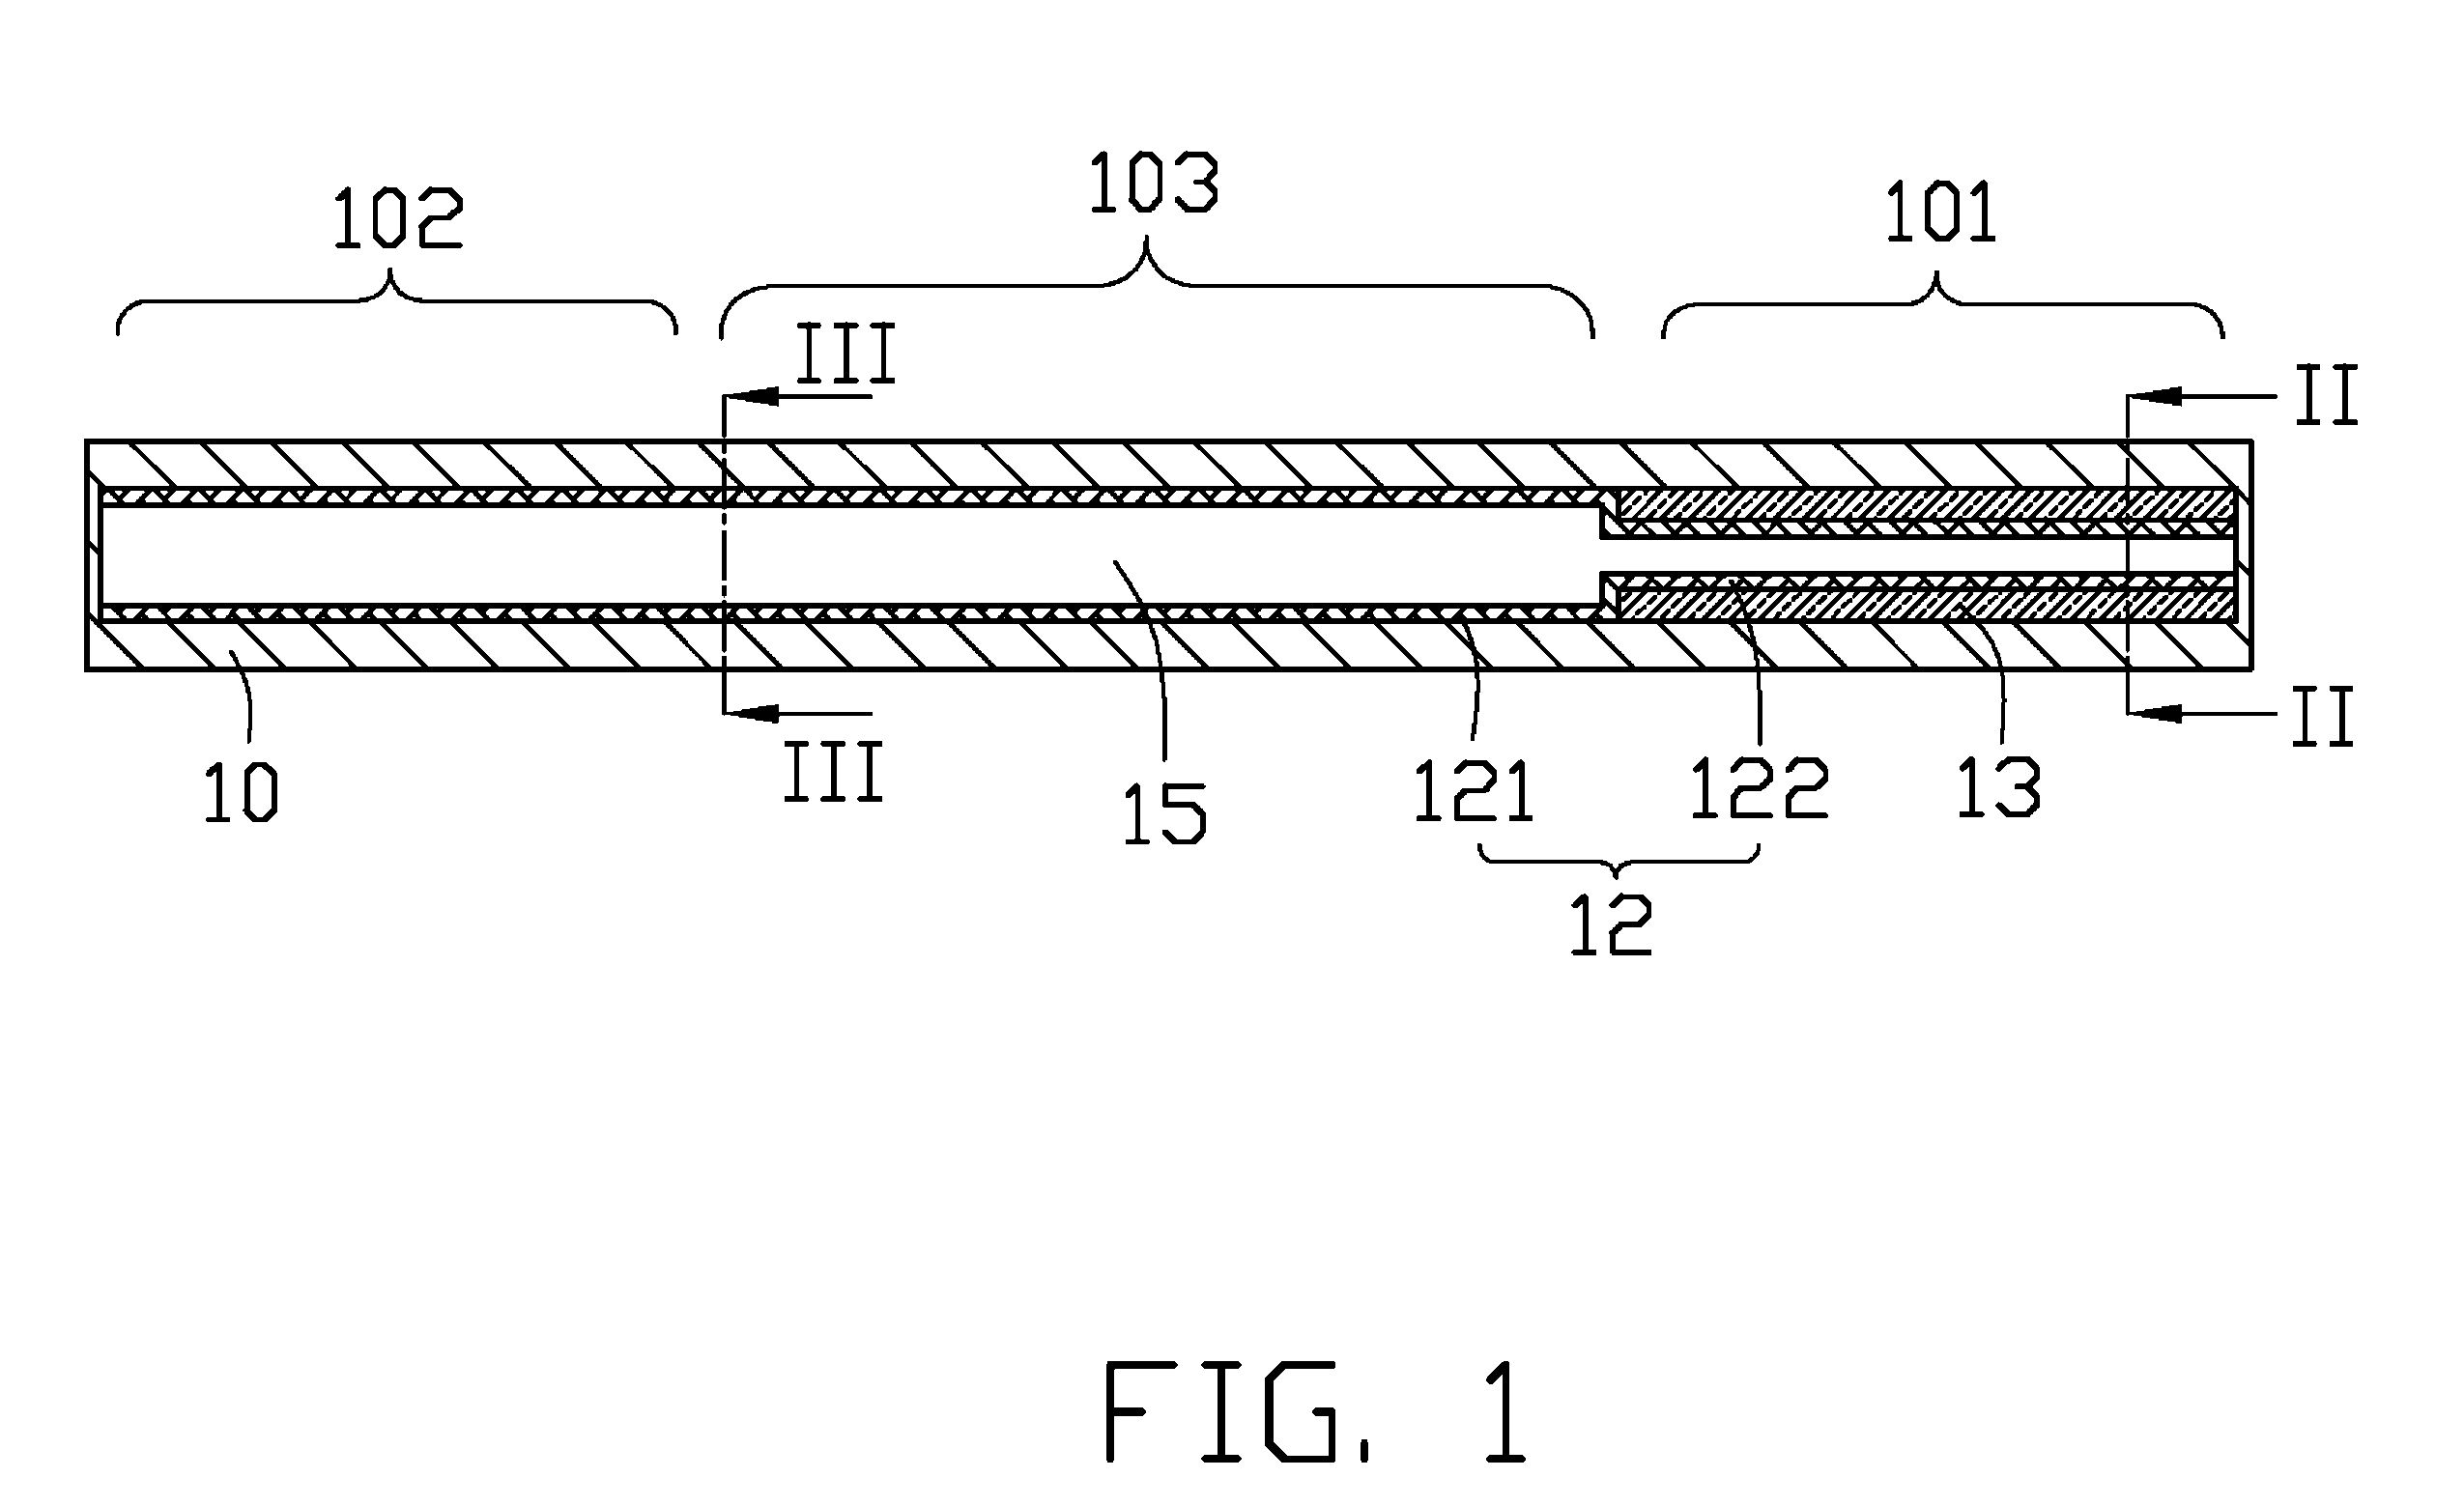 Heat pipe with composite wick structure